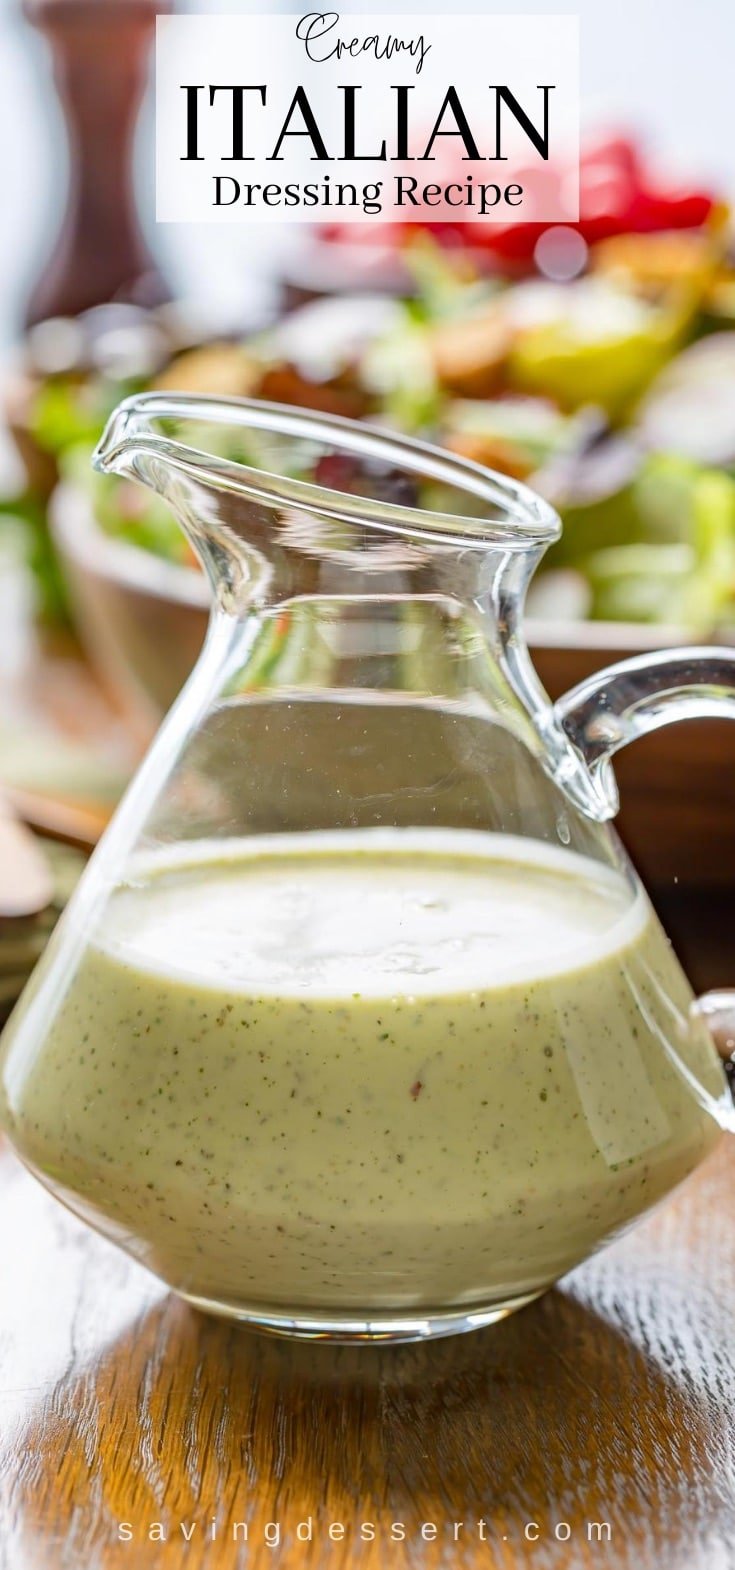 A bottle of creamy Italian Dressing loaded with herbs